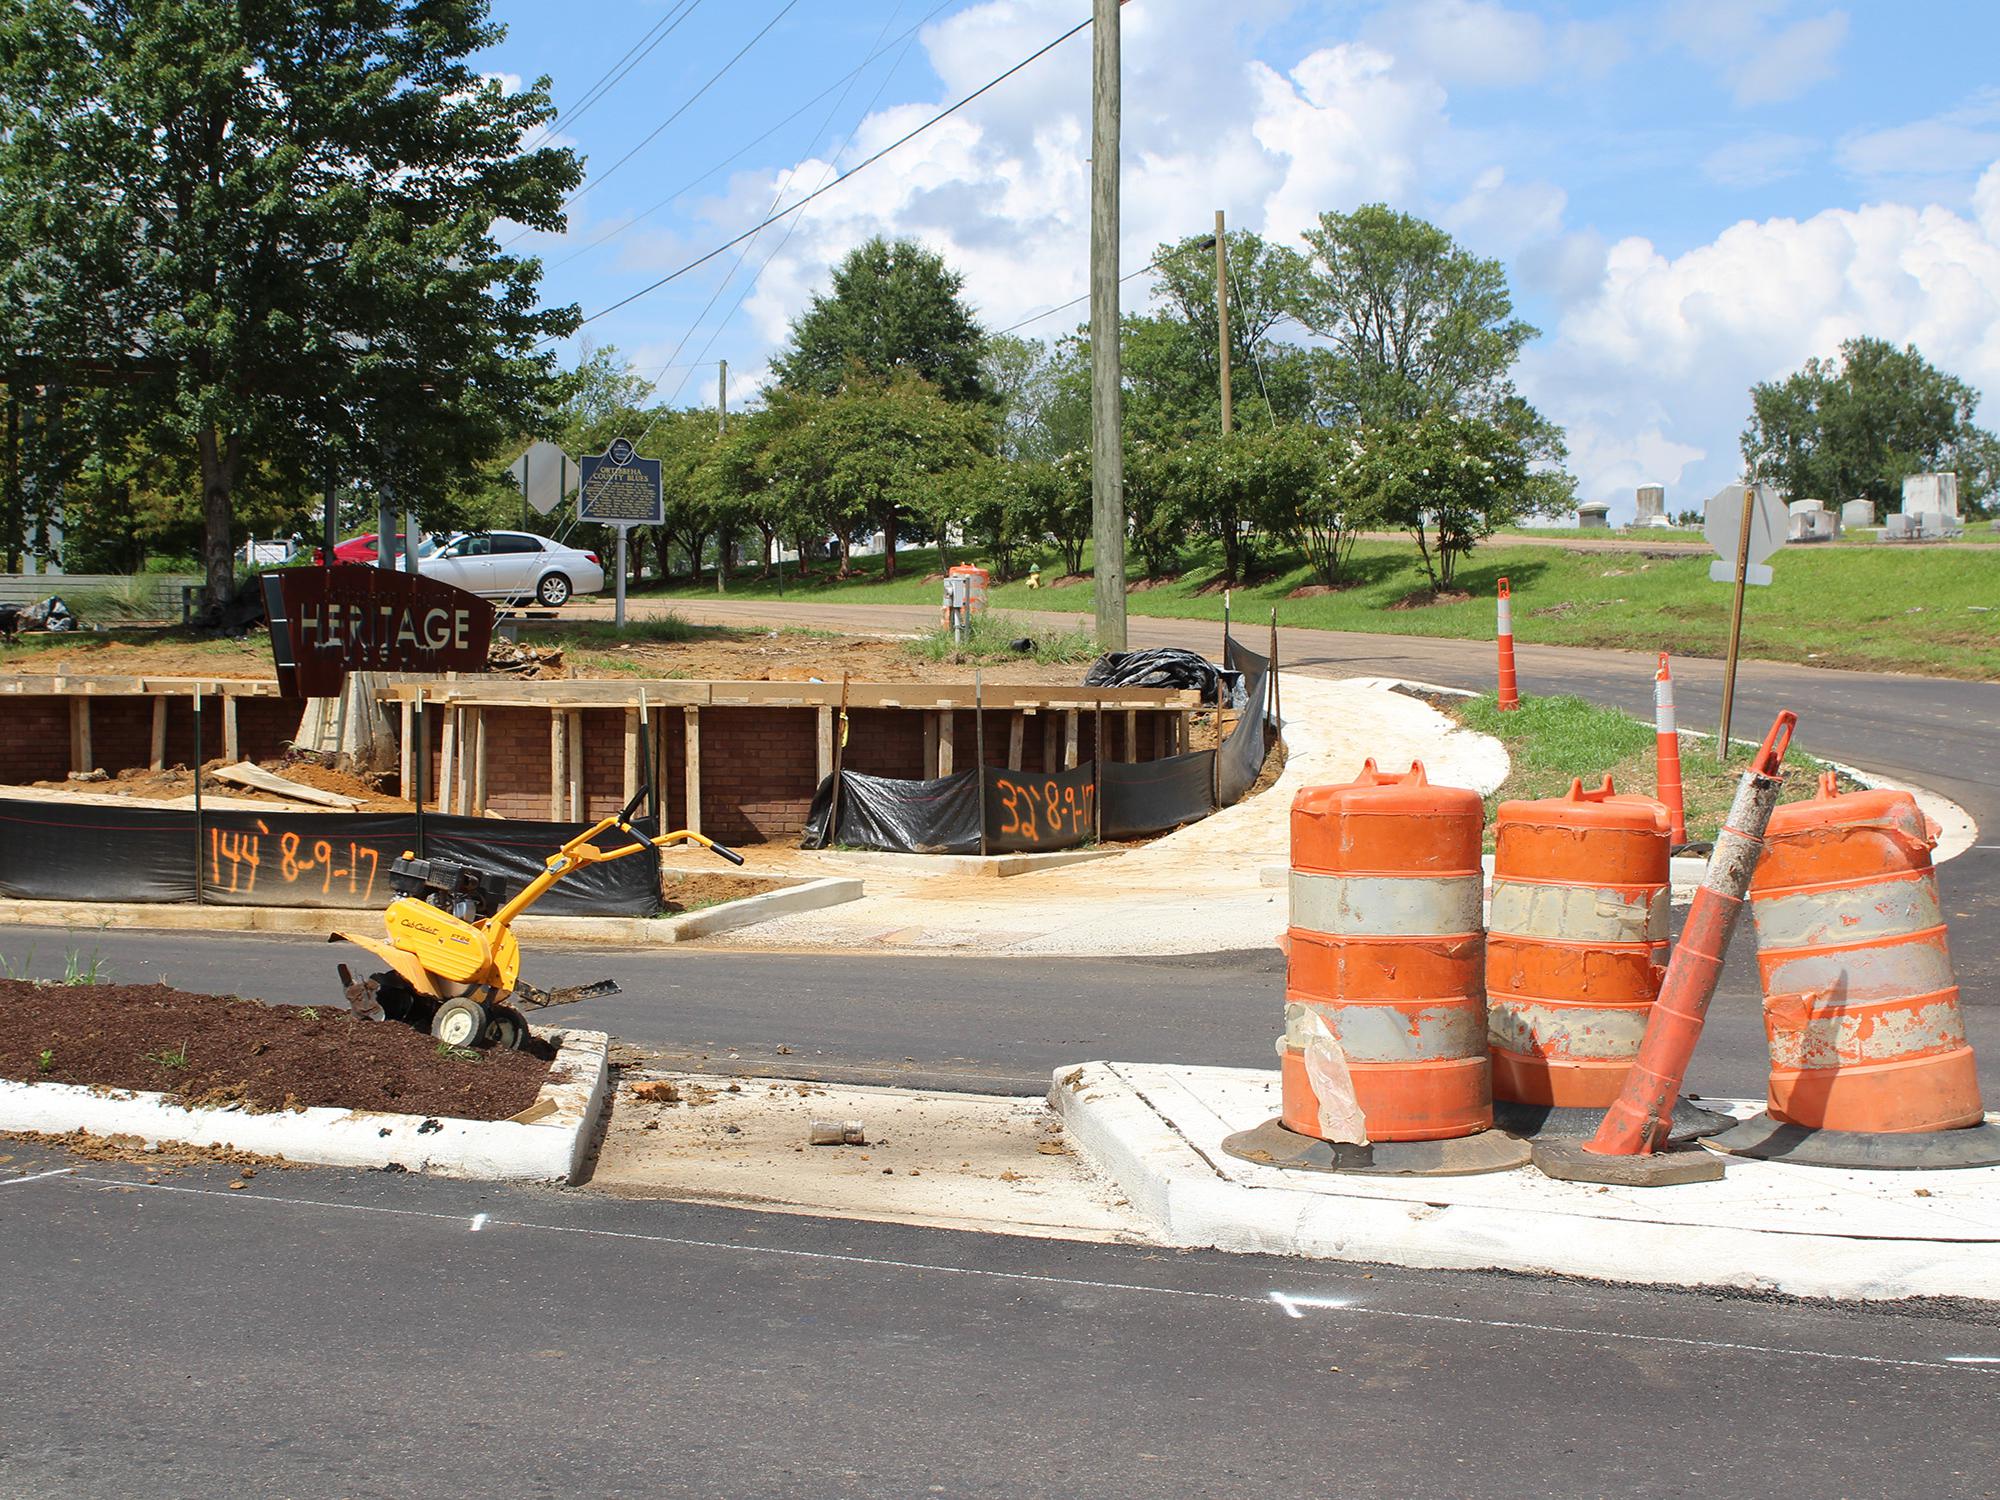 In order to make Starkville a more walkable community, bike lanes and sidewalk additions were constructed downtown on August 15, 2017. (Photo by MSU Extension Service/Jessica Smith)